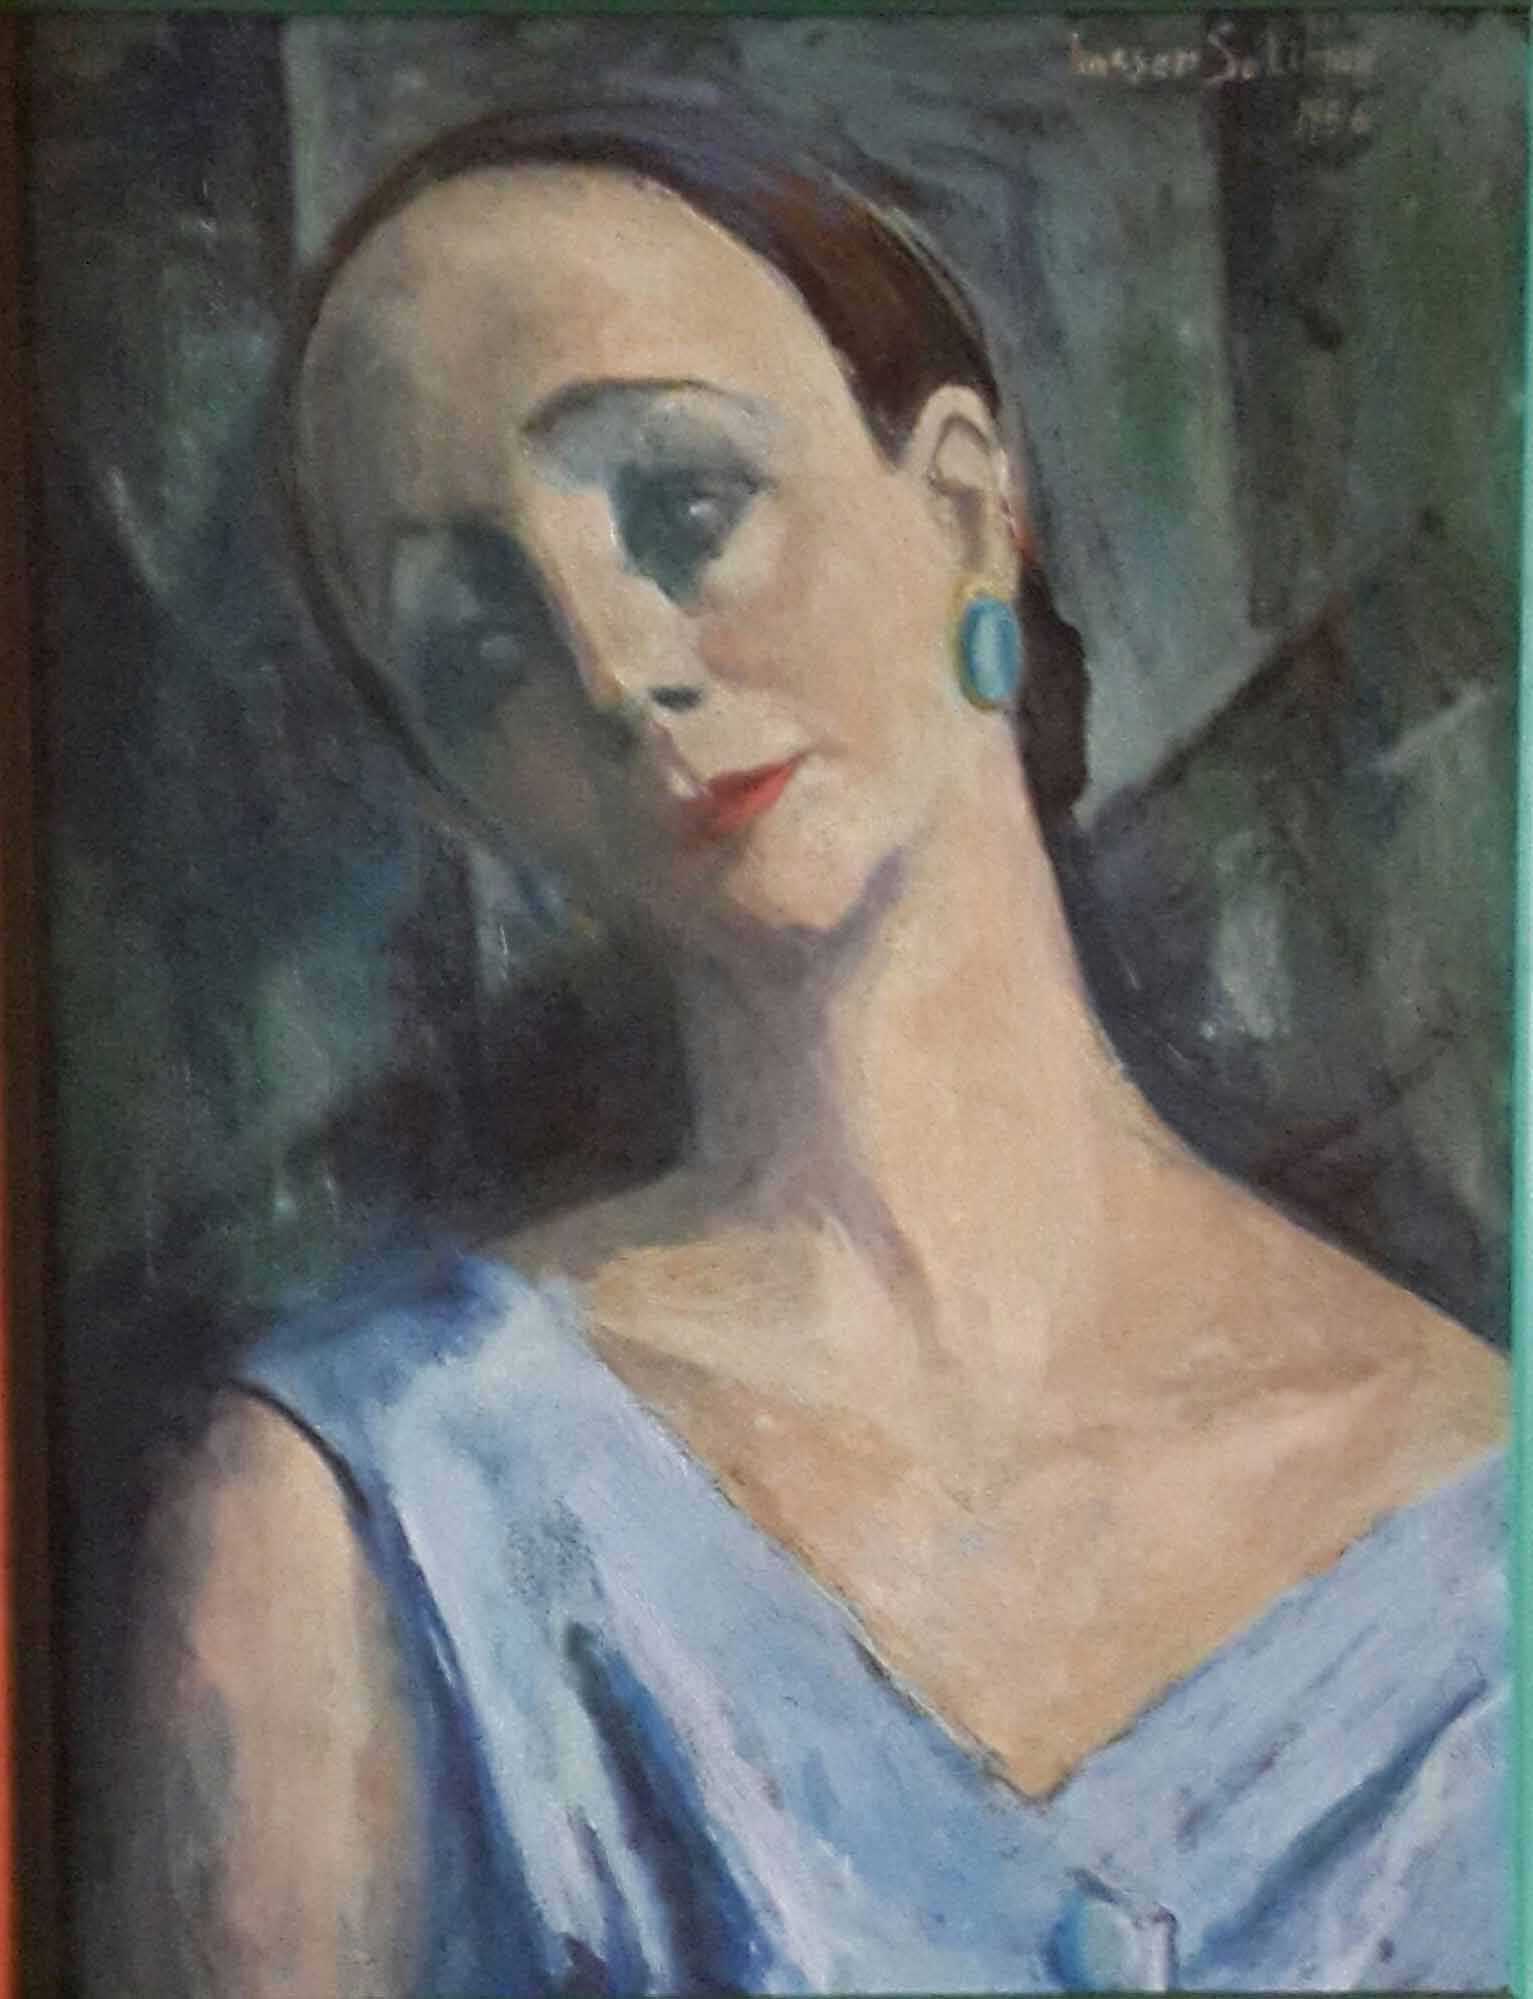 Hassan Soliman, Untitled [Portrait of a Lady]. Oil on wood, dated 1956, signed